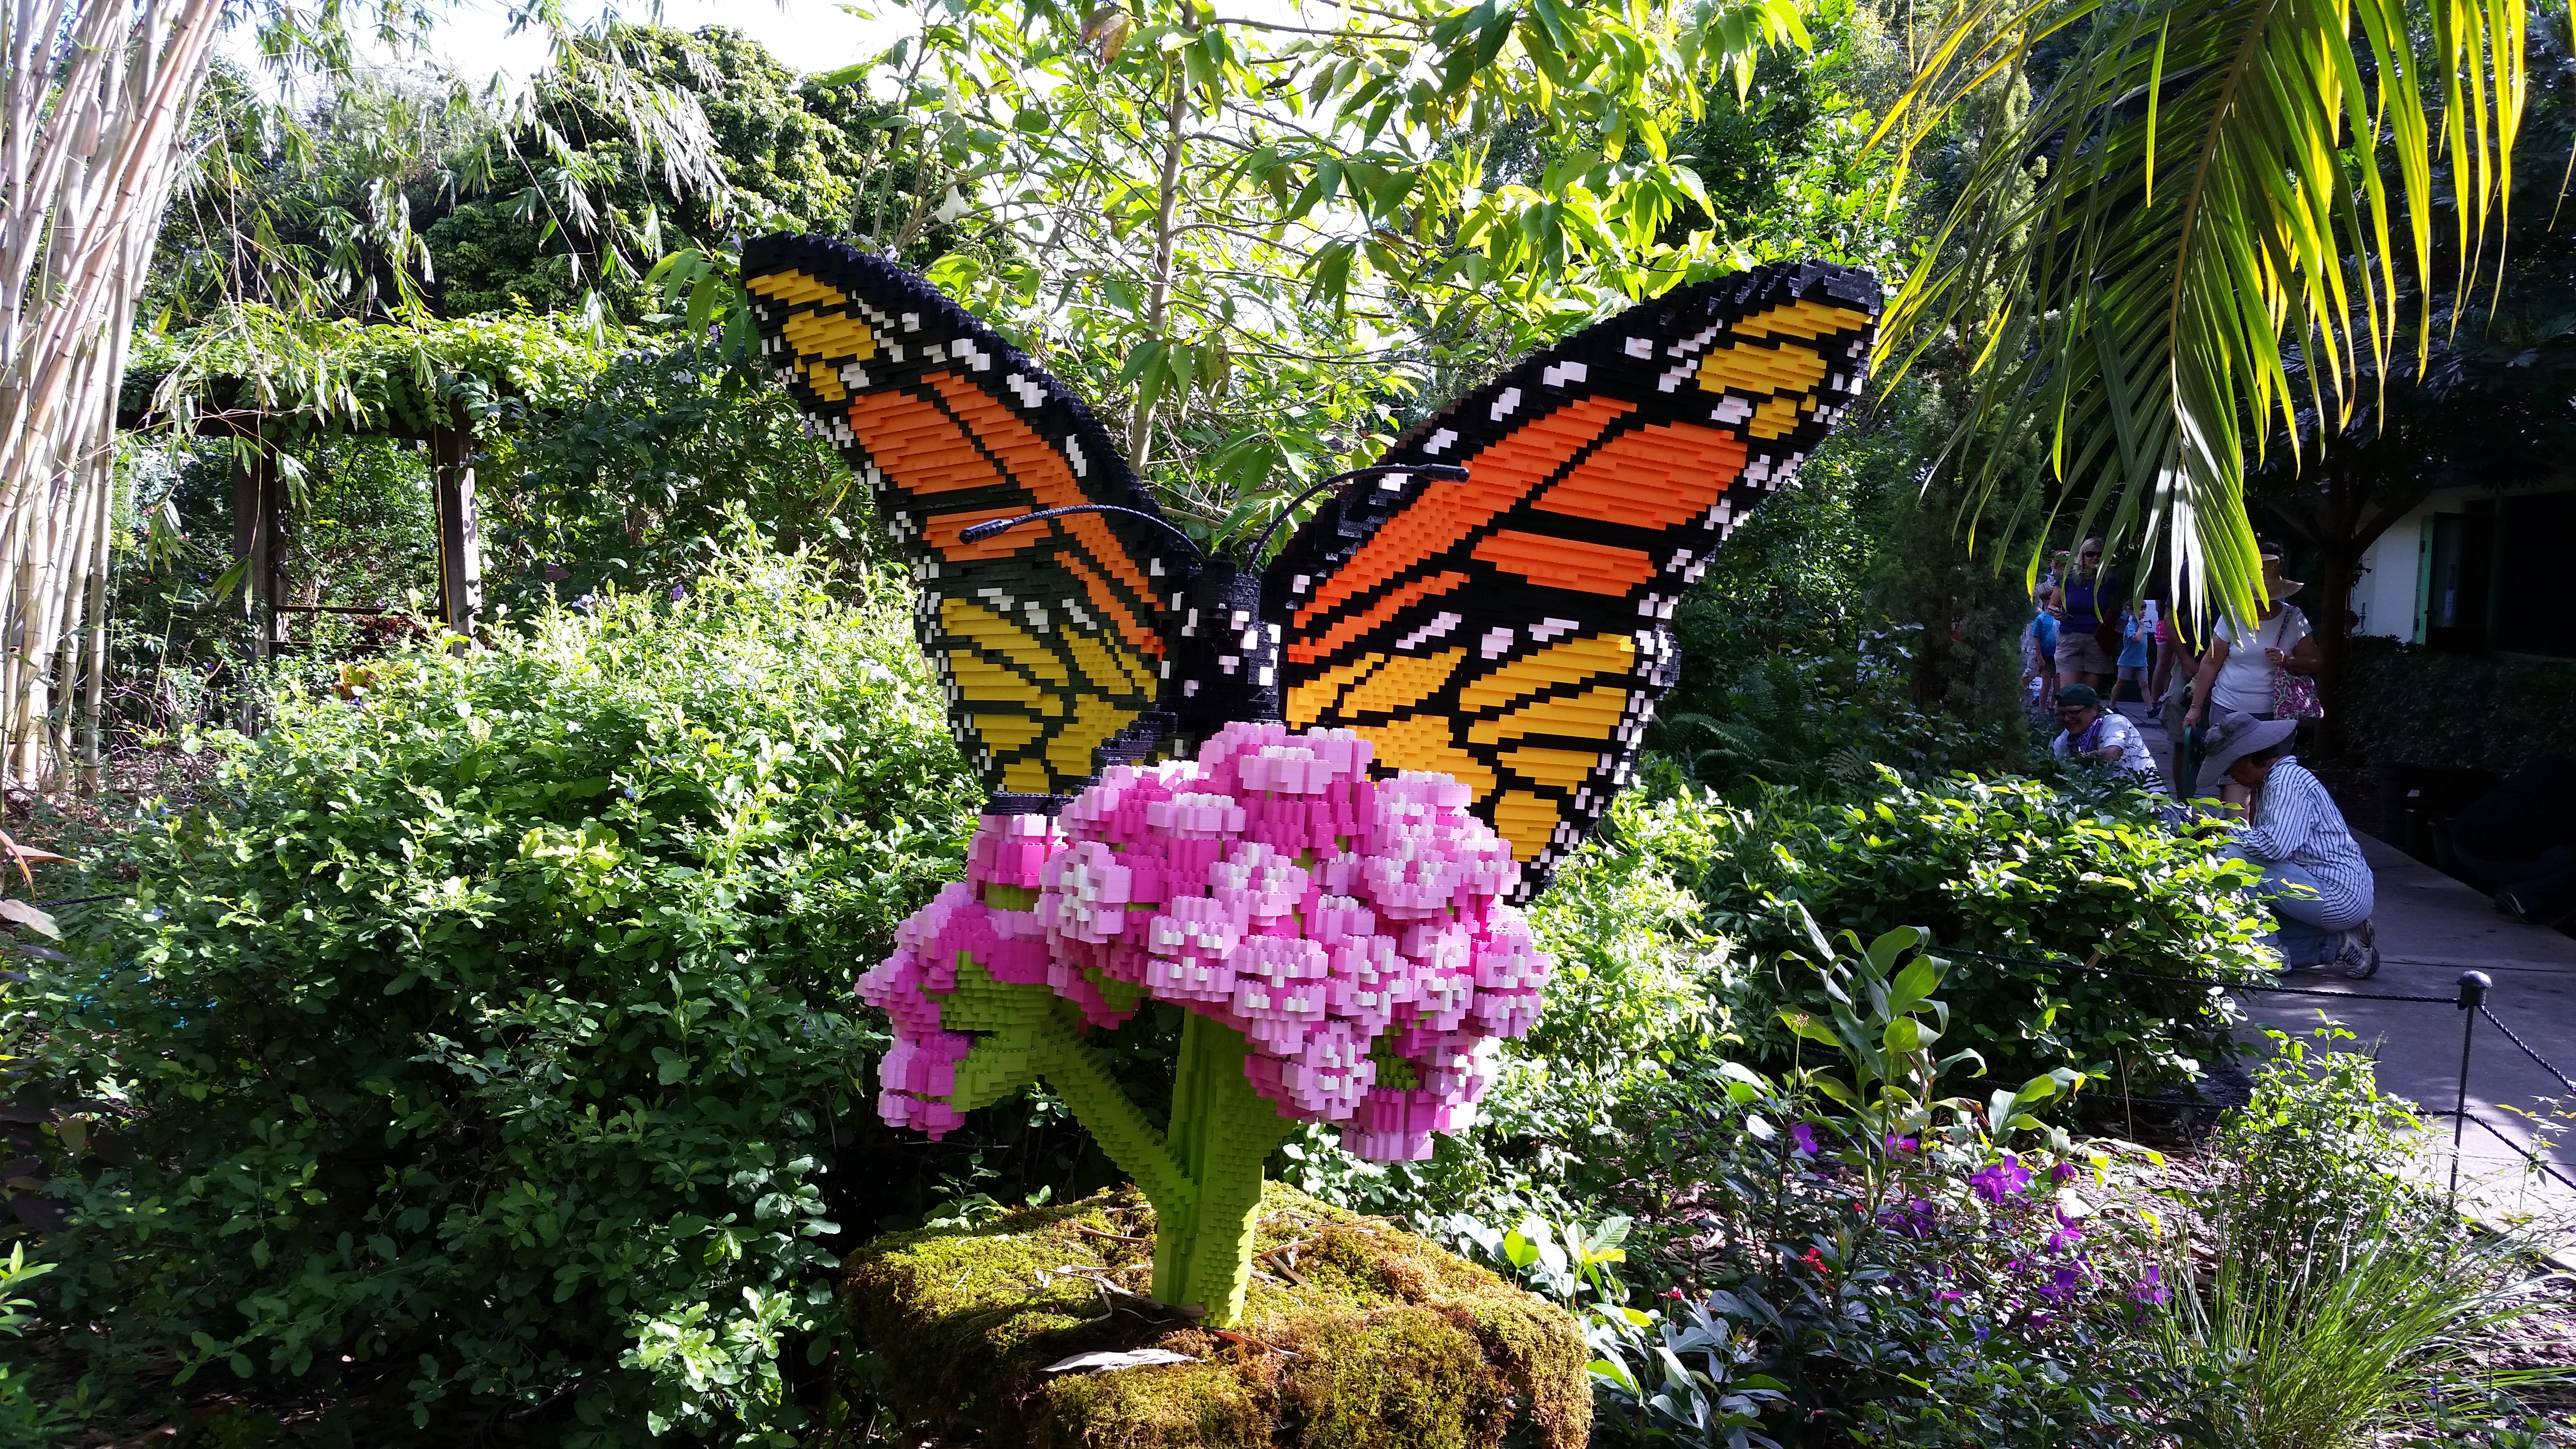 Lego S Nature Connects Gallery Mounts Botanical Garden The